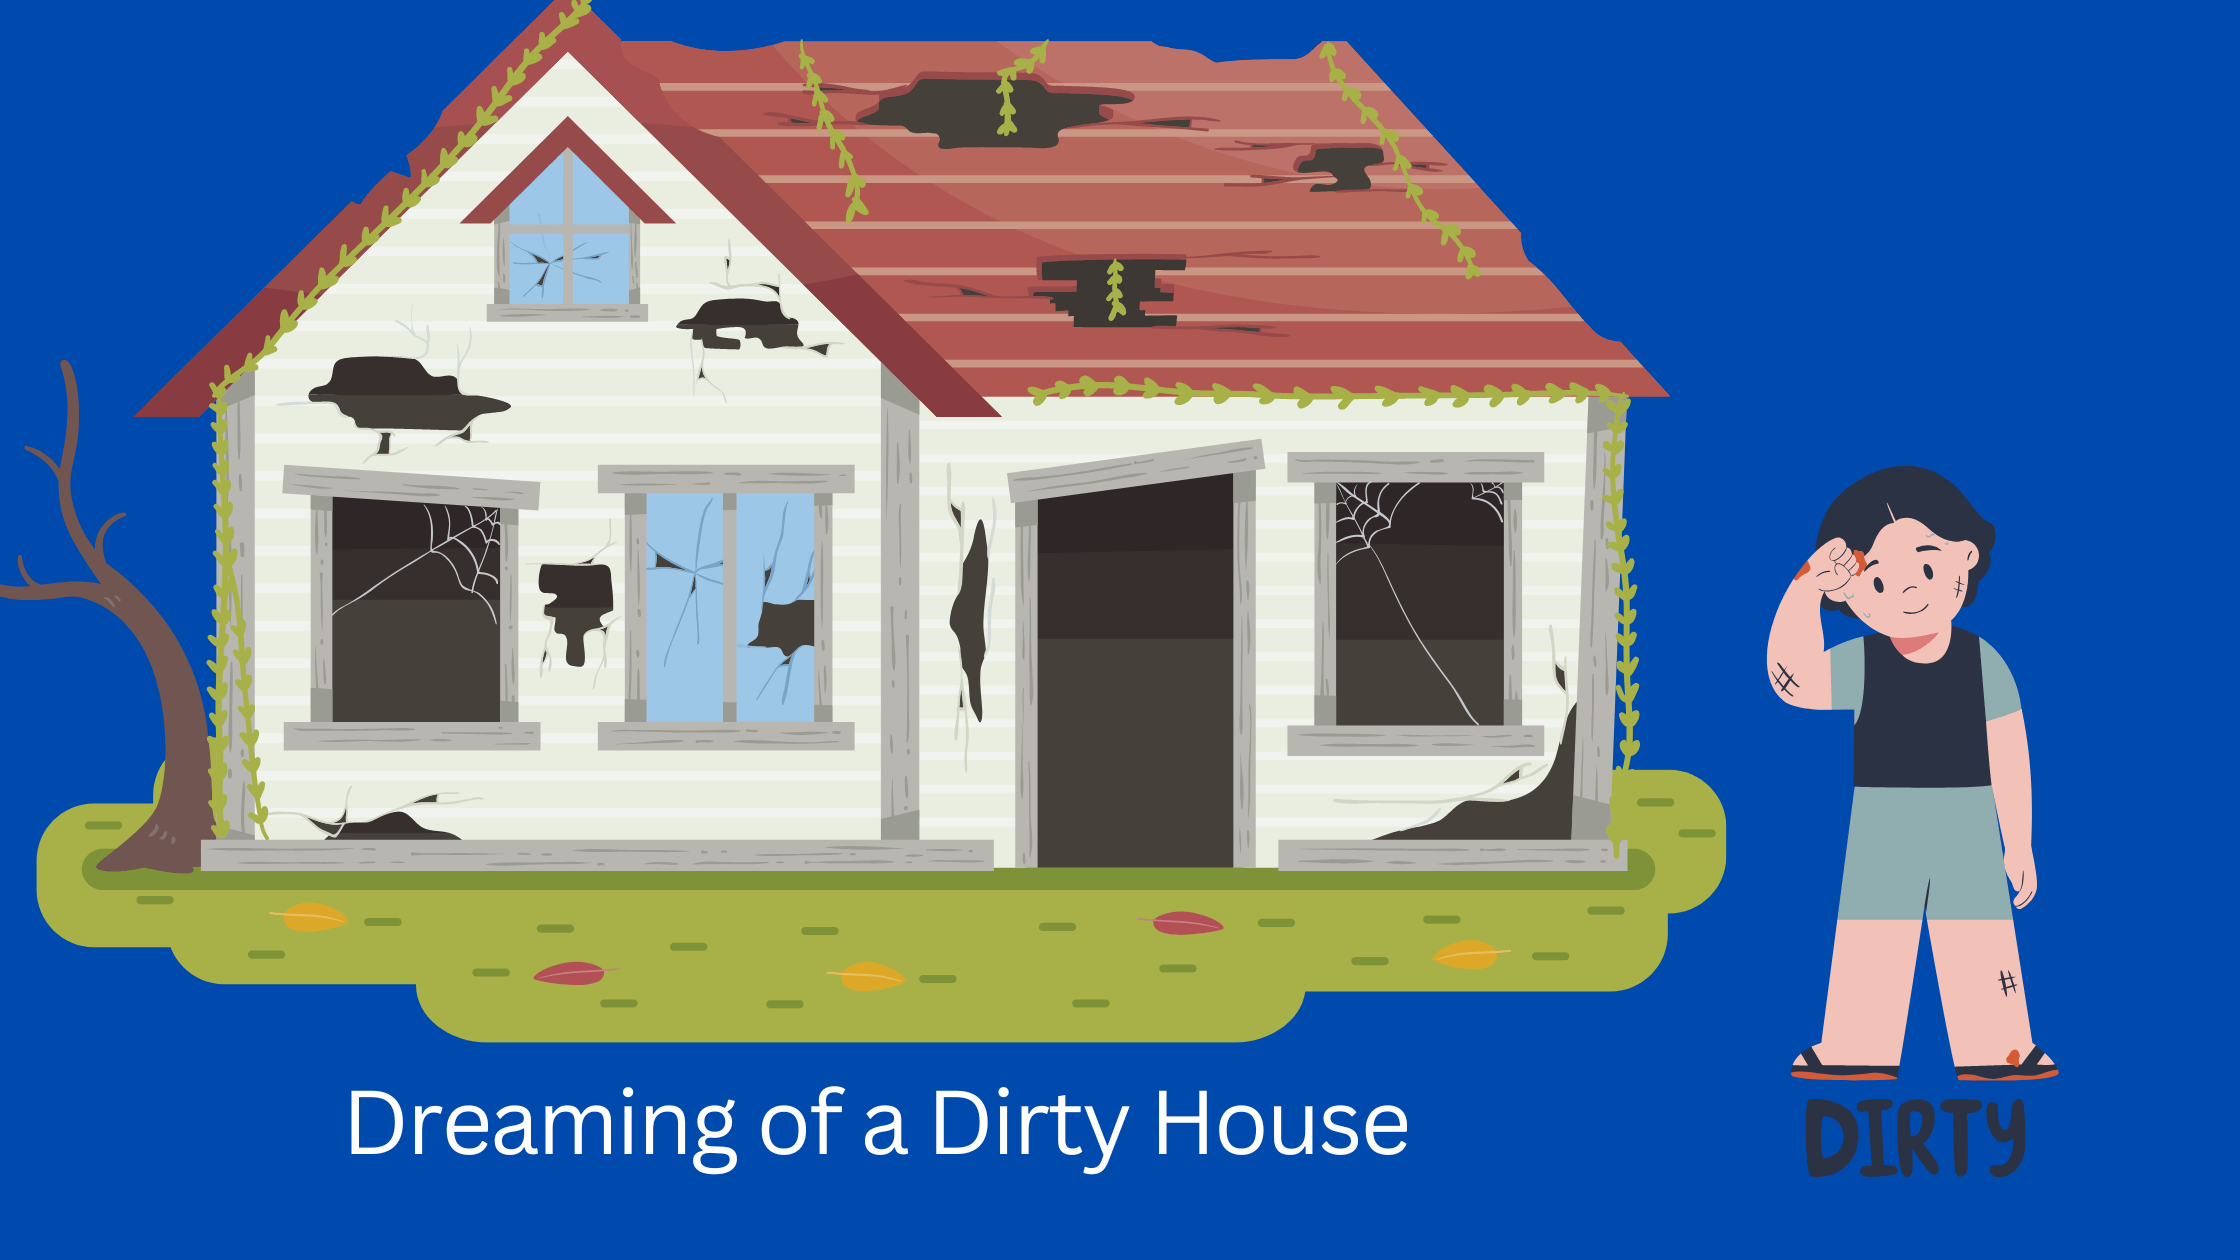 Dreaming of a Dirty House